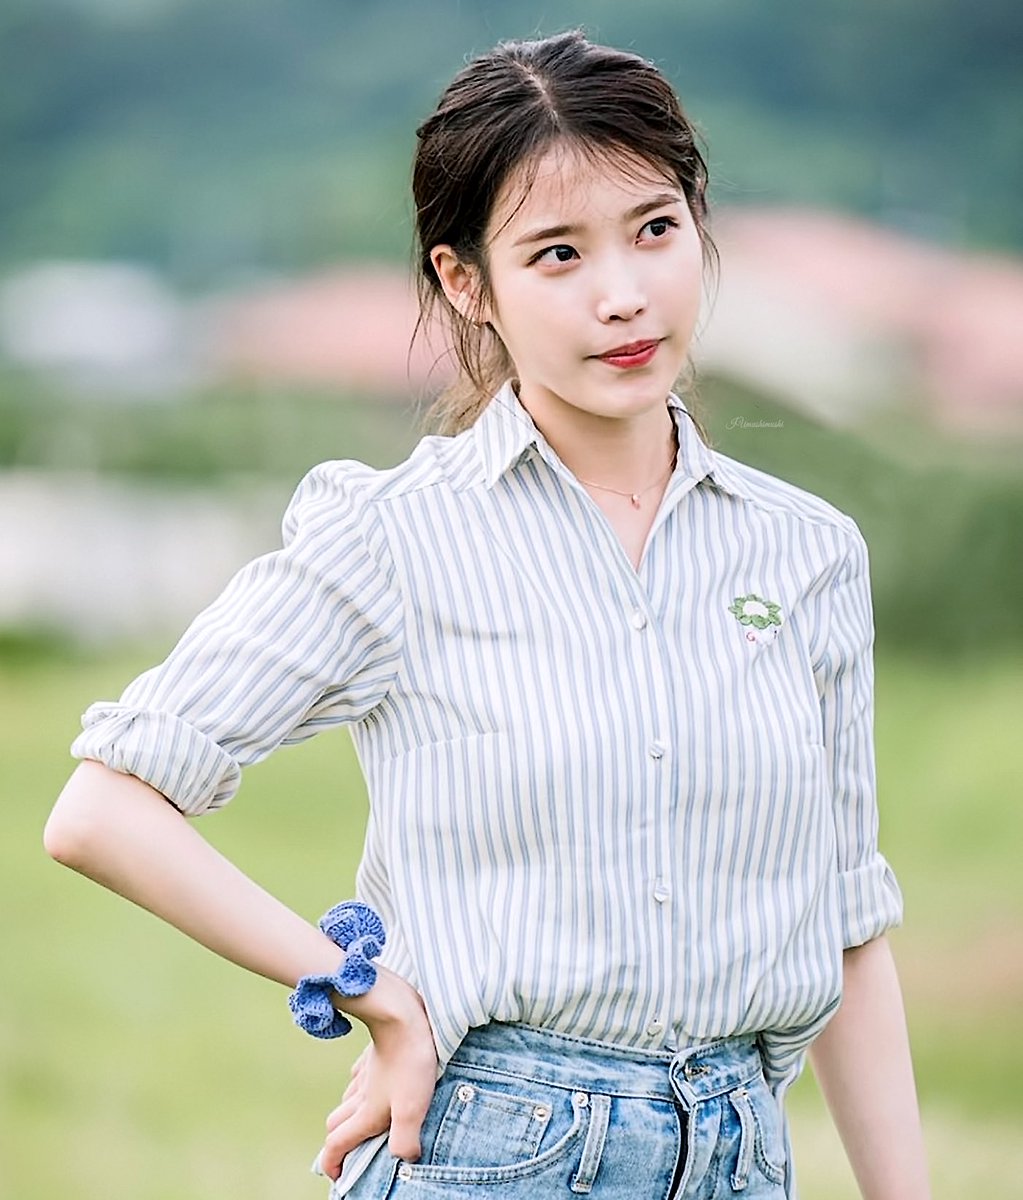 “When  #IU arrived, she brought two suitcases with her, incl. gifts such as her mother’s homegrown vegetables & homemade side dishes, as well as coffee her father had roasted. I’m thankful & touched, and it reminded me why IU is the way she is.”- Kang Koong, House on Wheels PD